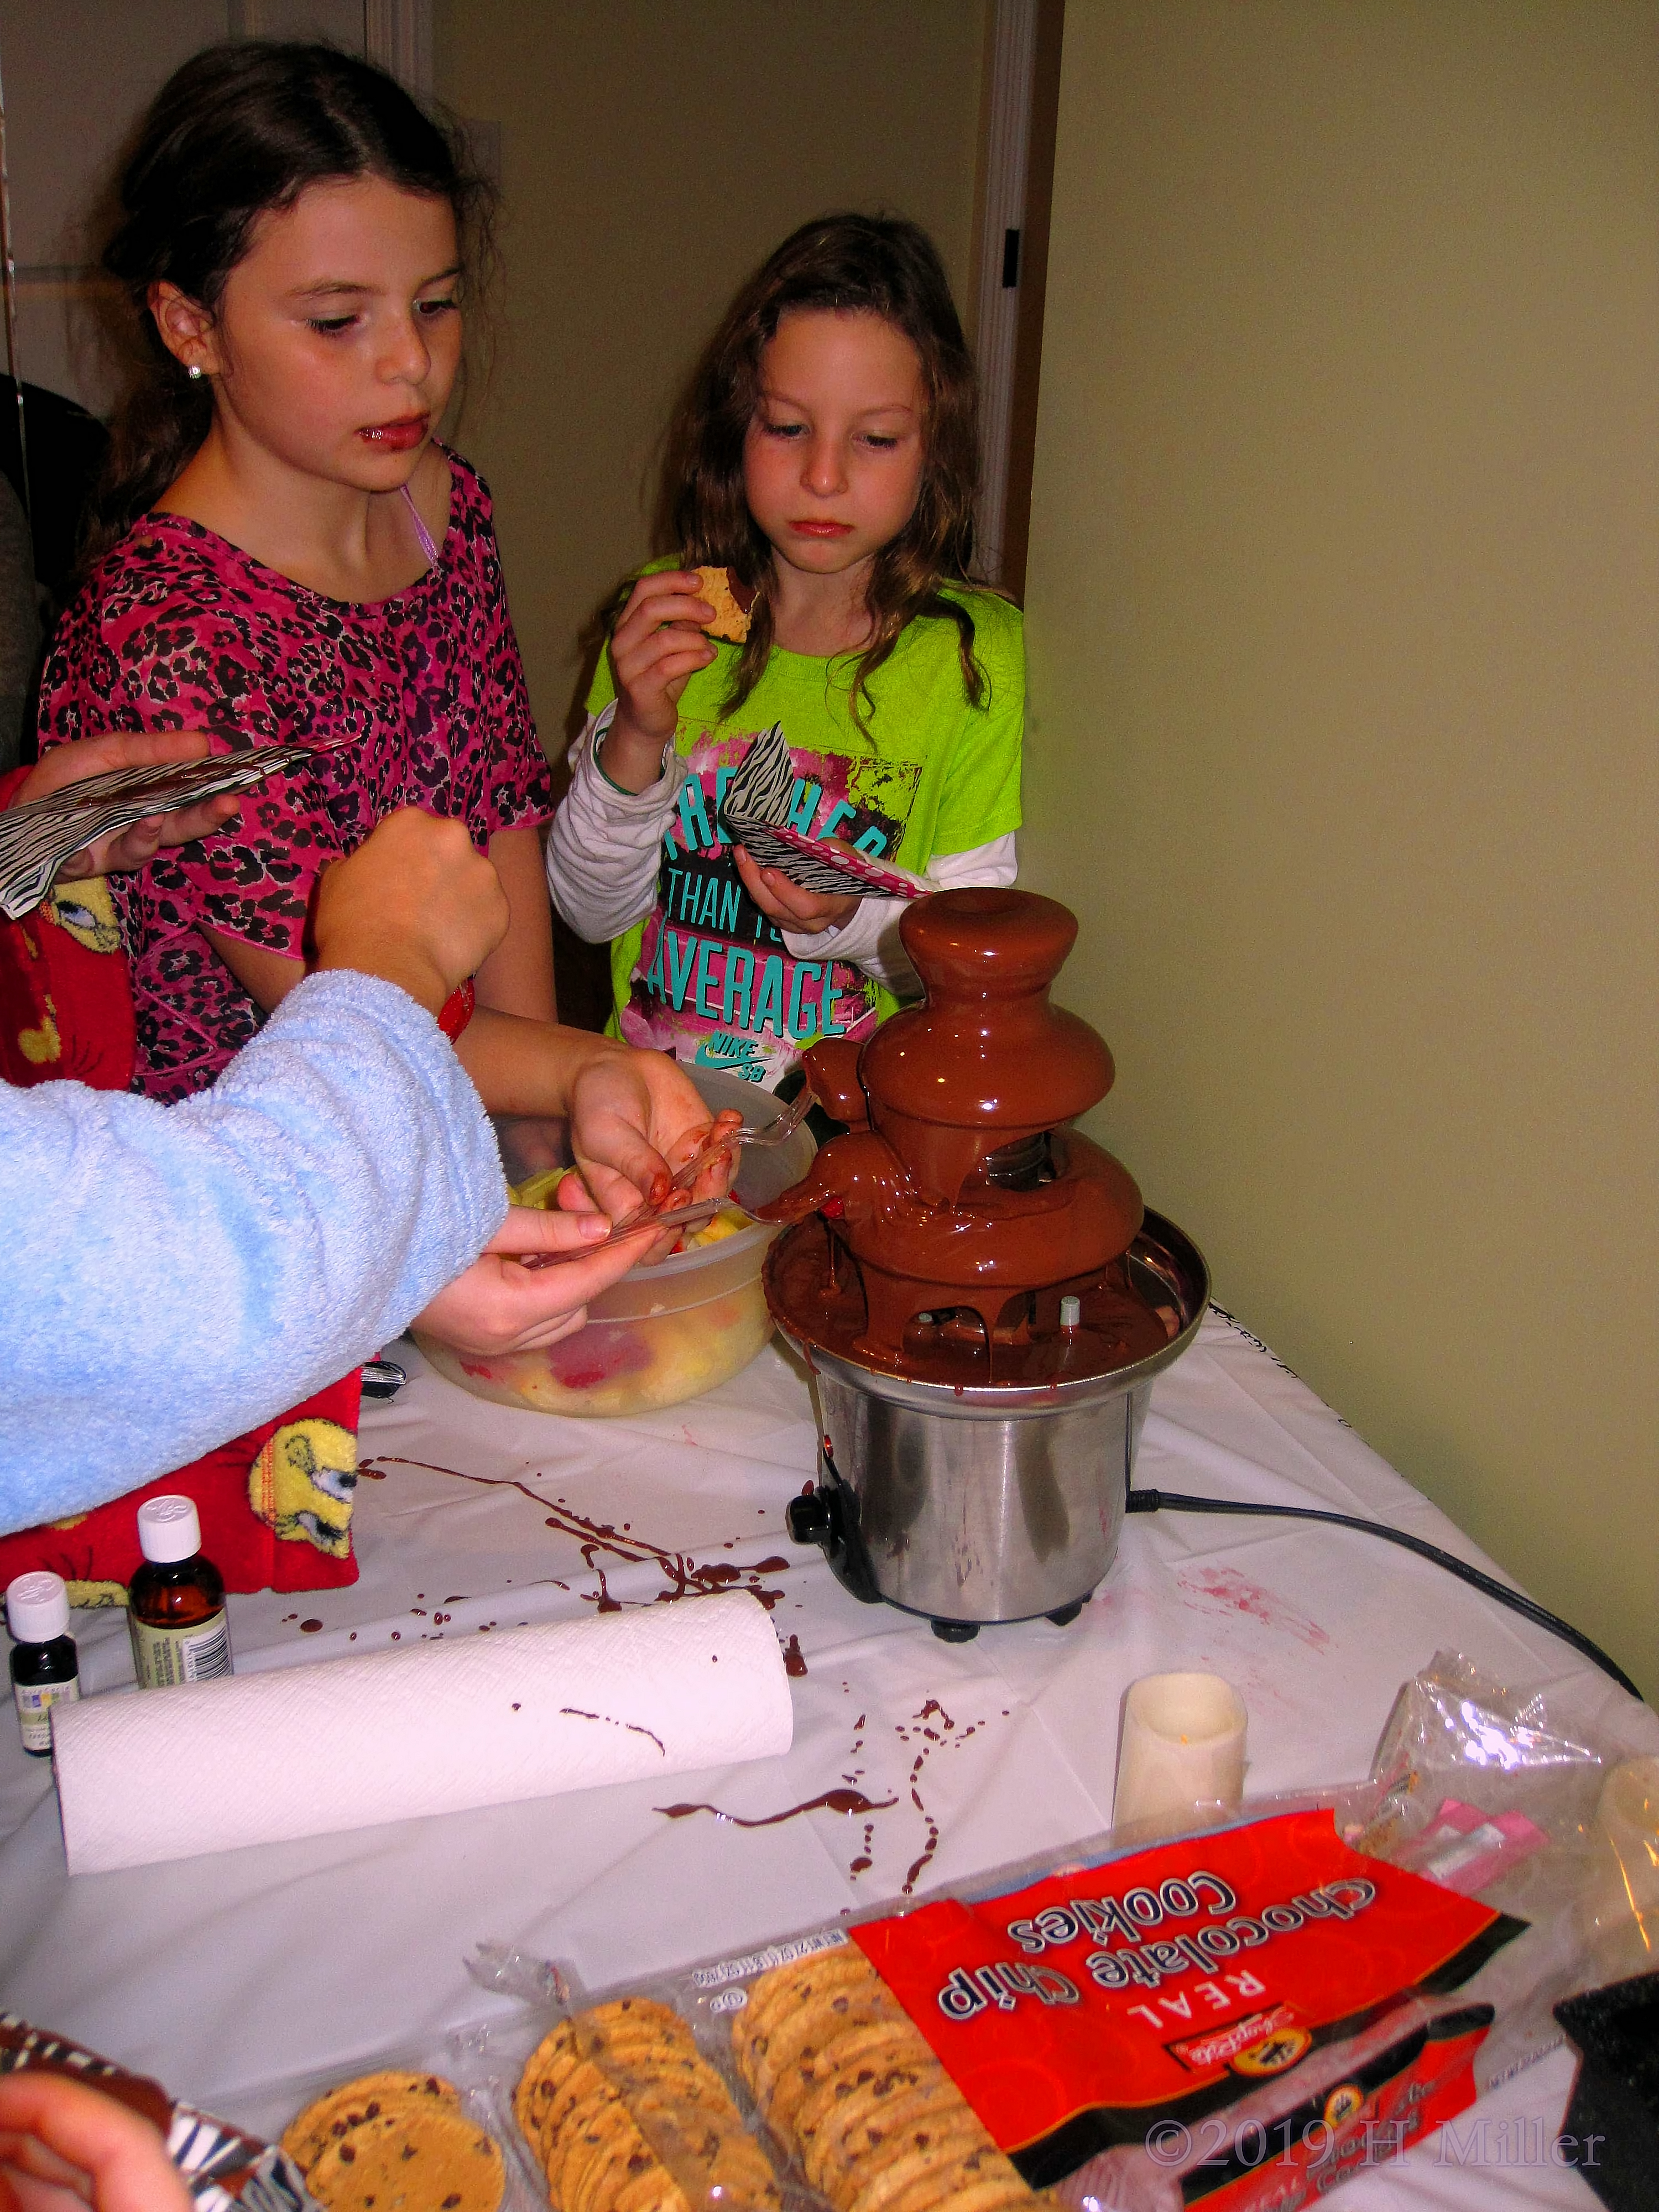 The Best Fountains Are Made Of Chocolate! Party Guests Try The Chocolate Fountain!